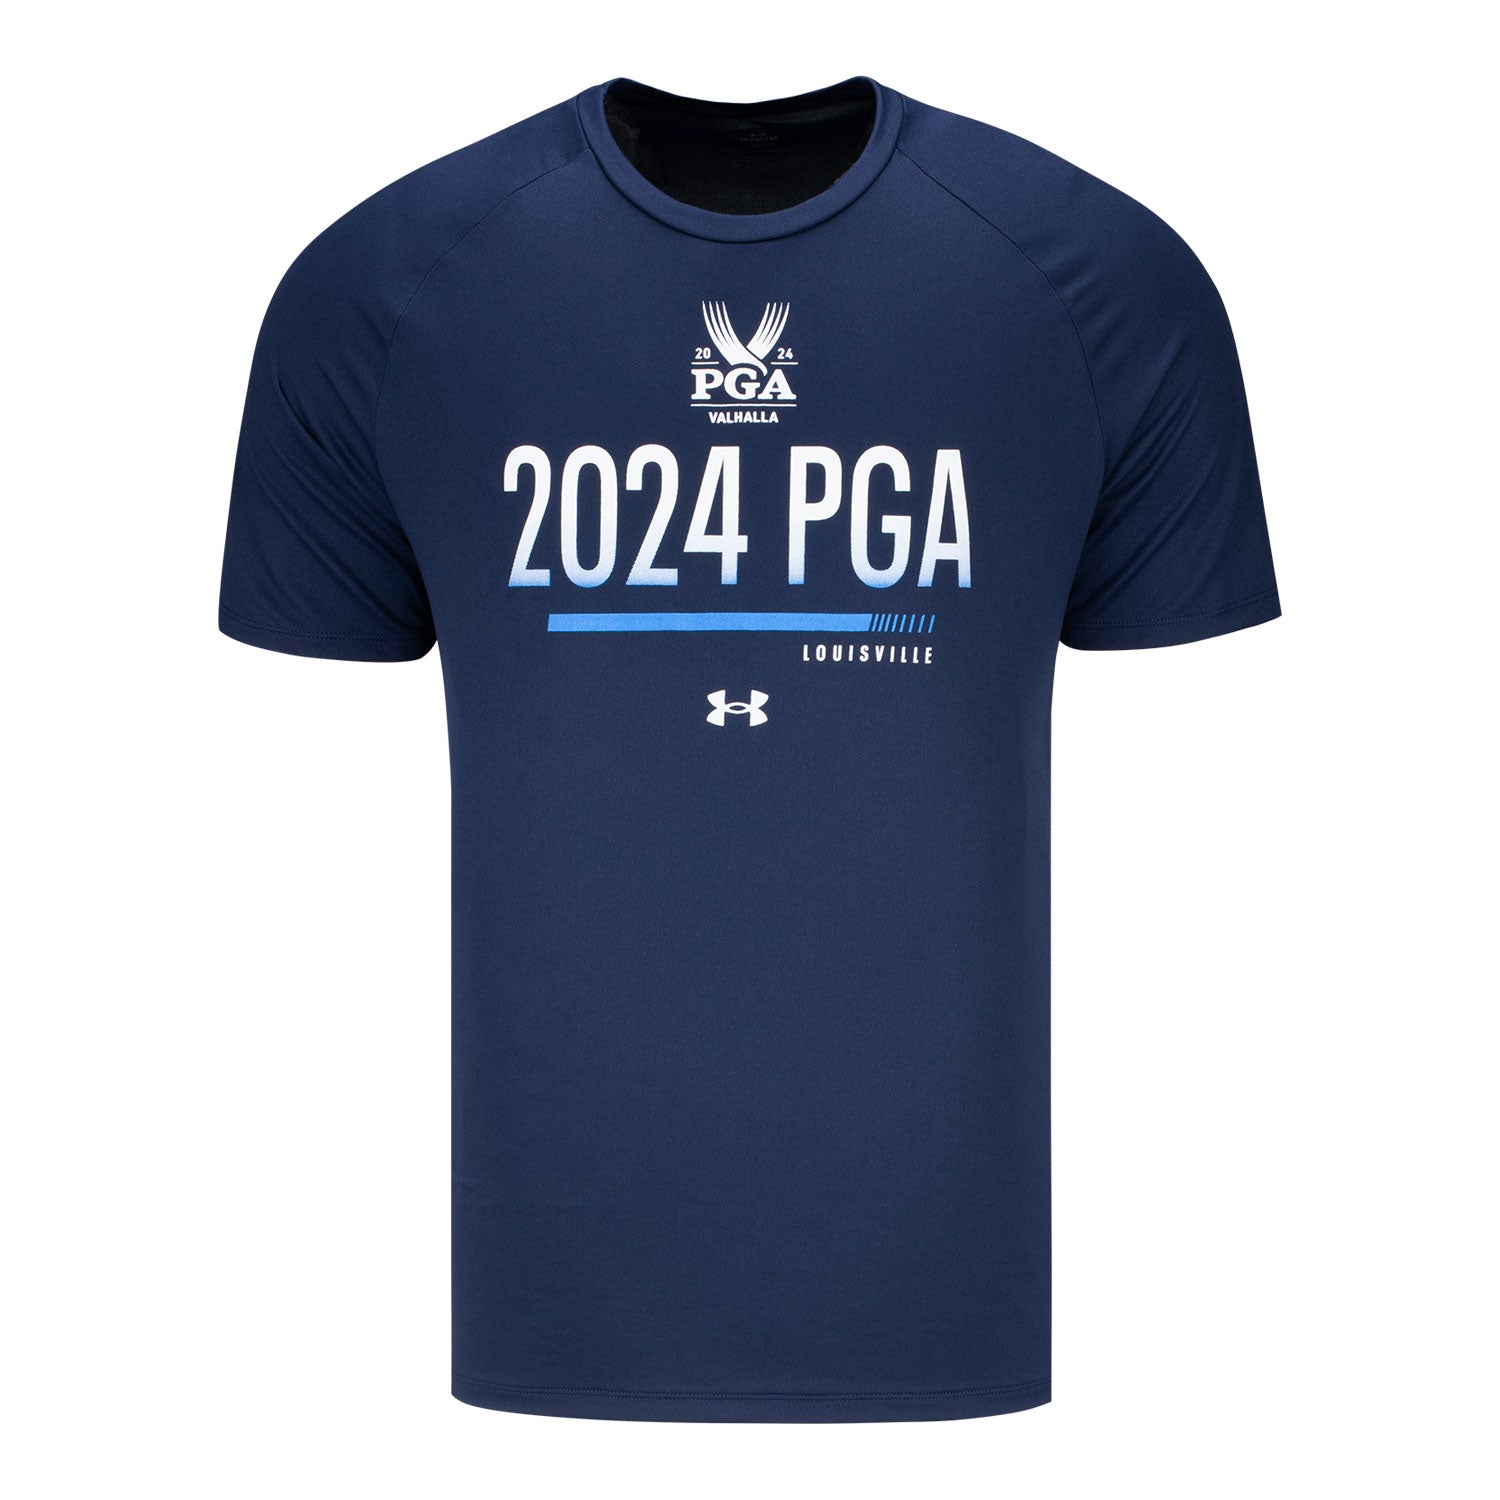 Under Armour 2024 PGA Championship Performance T-Shirt in Navy - Front View